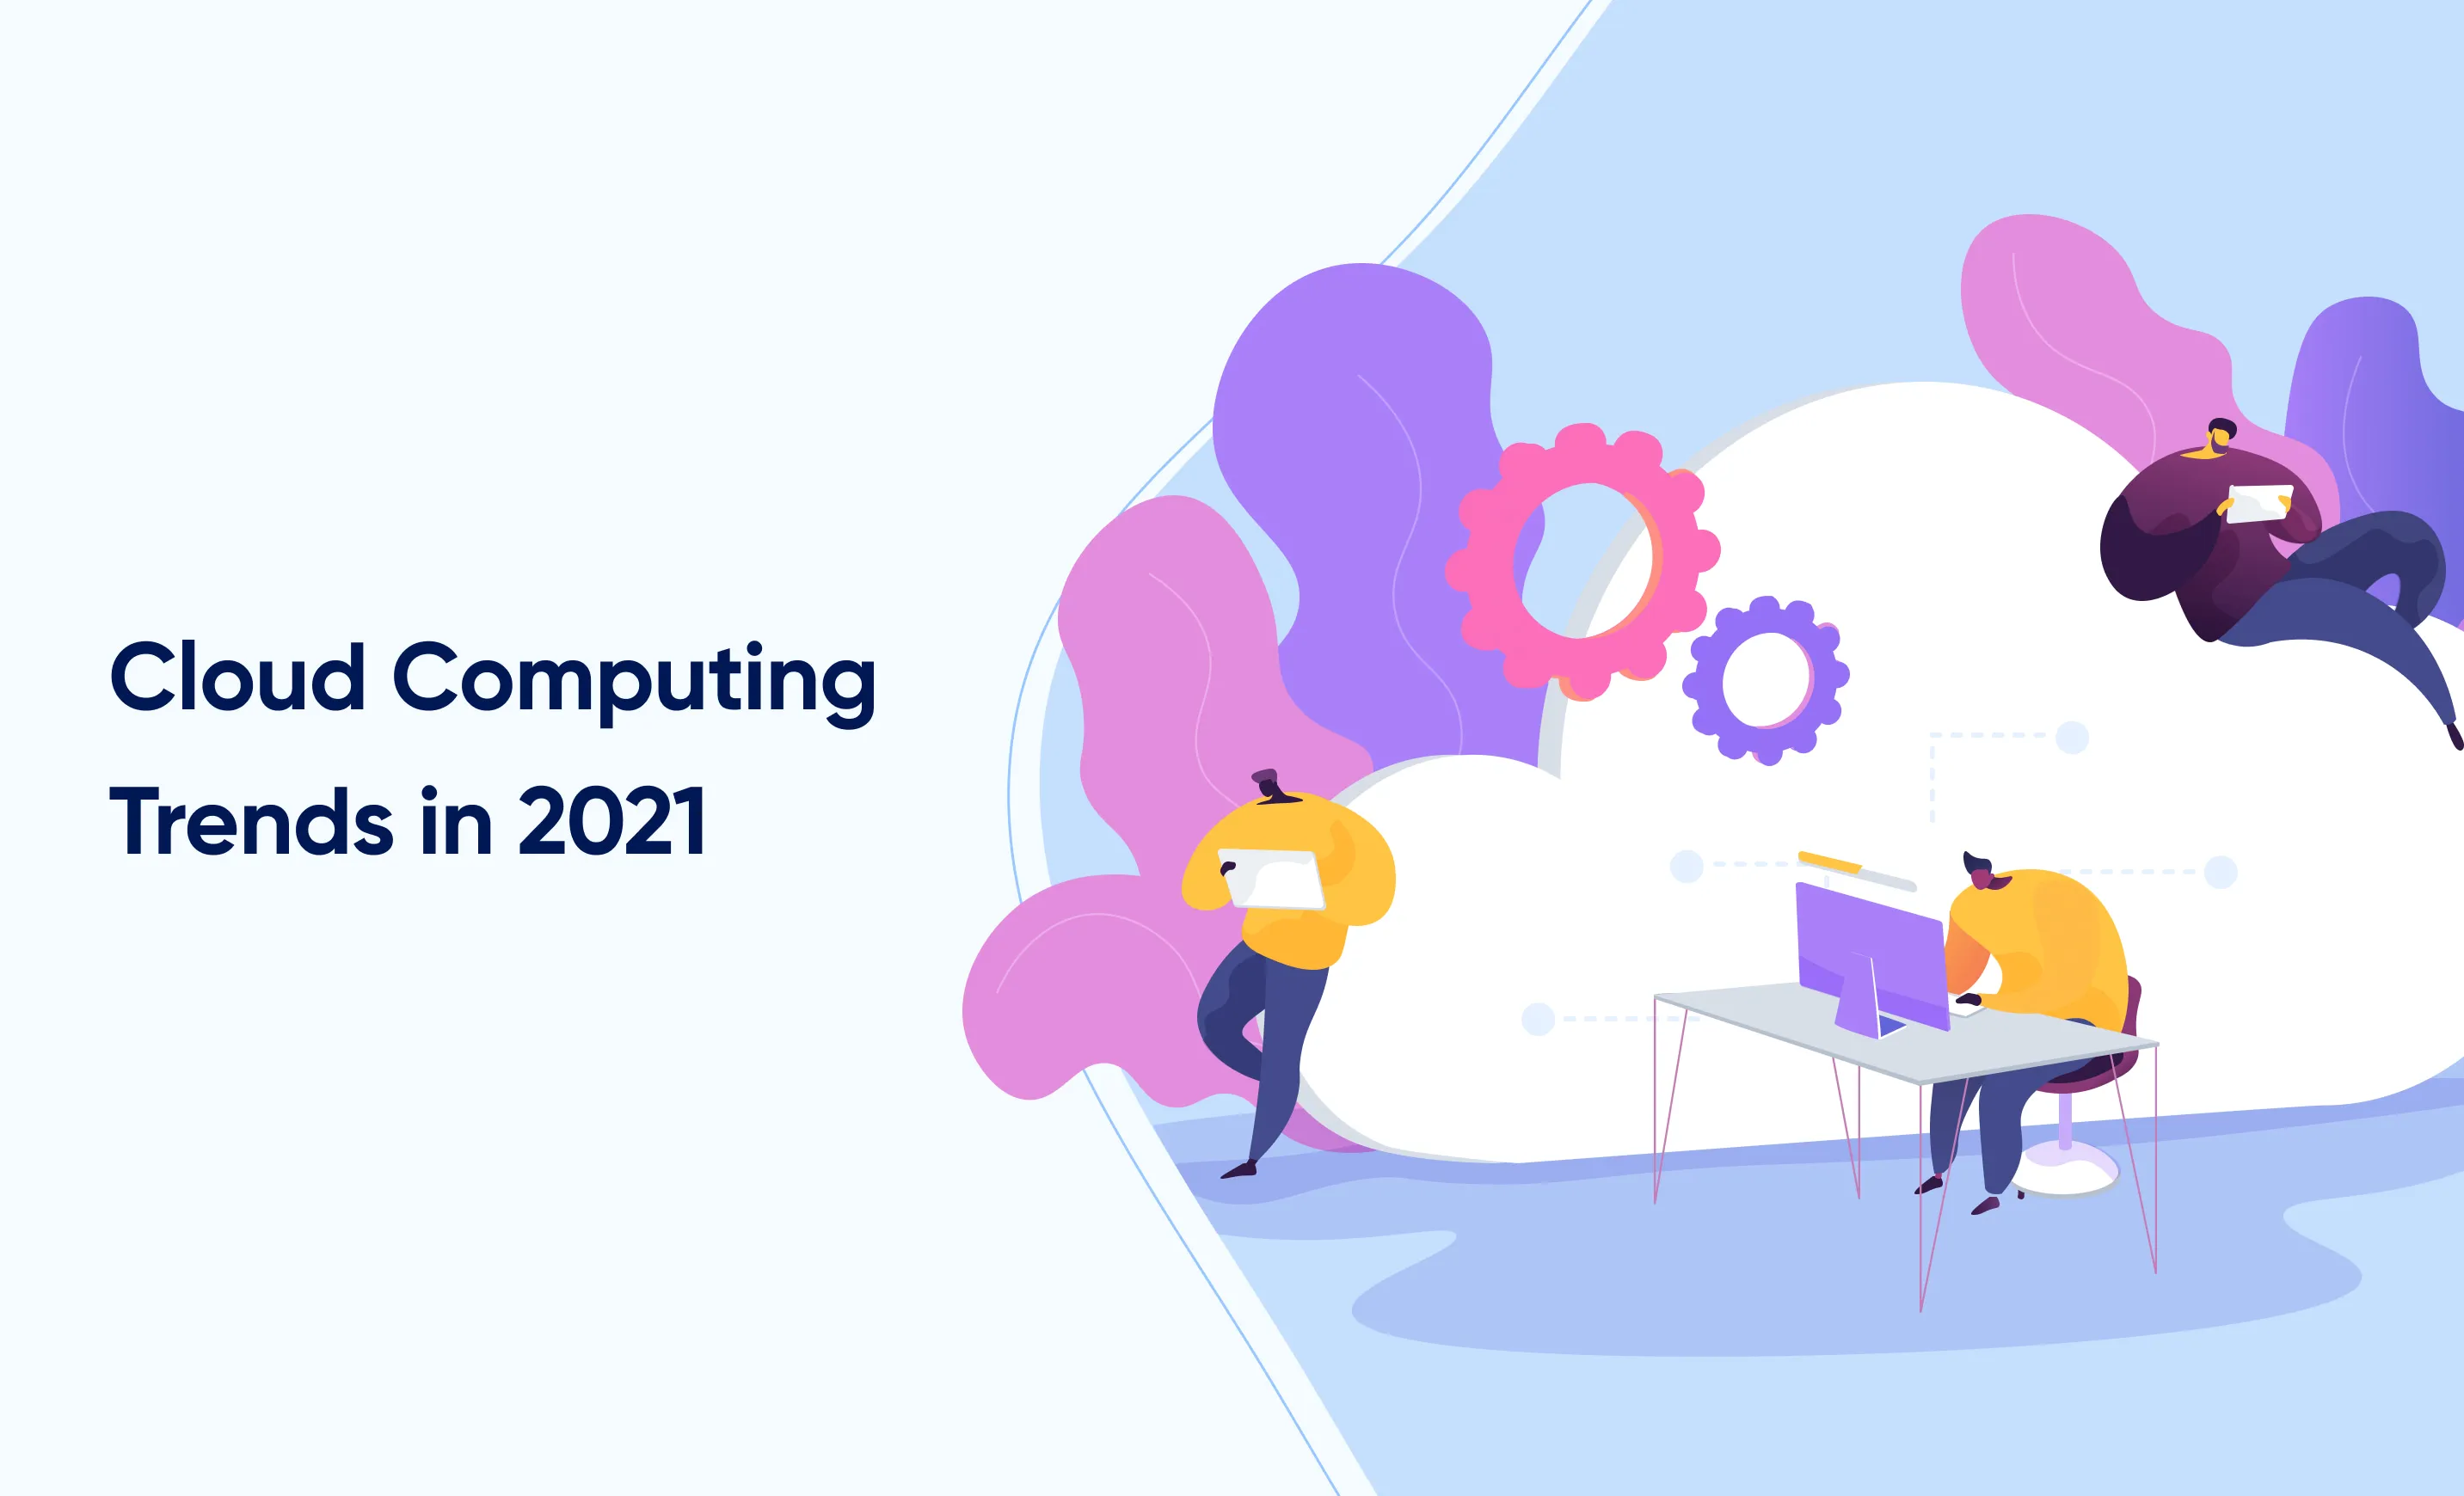 Cloud Computing Trends in 2021 and 2022